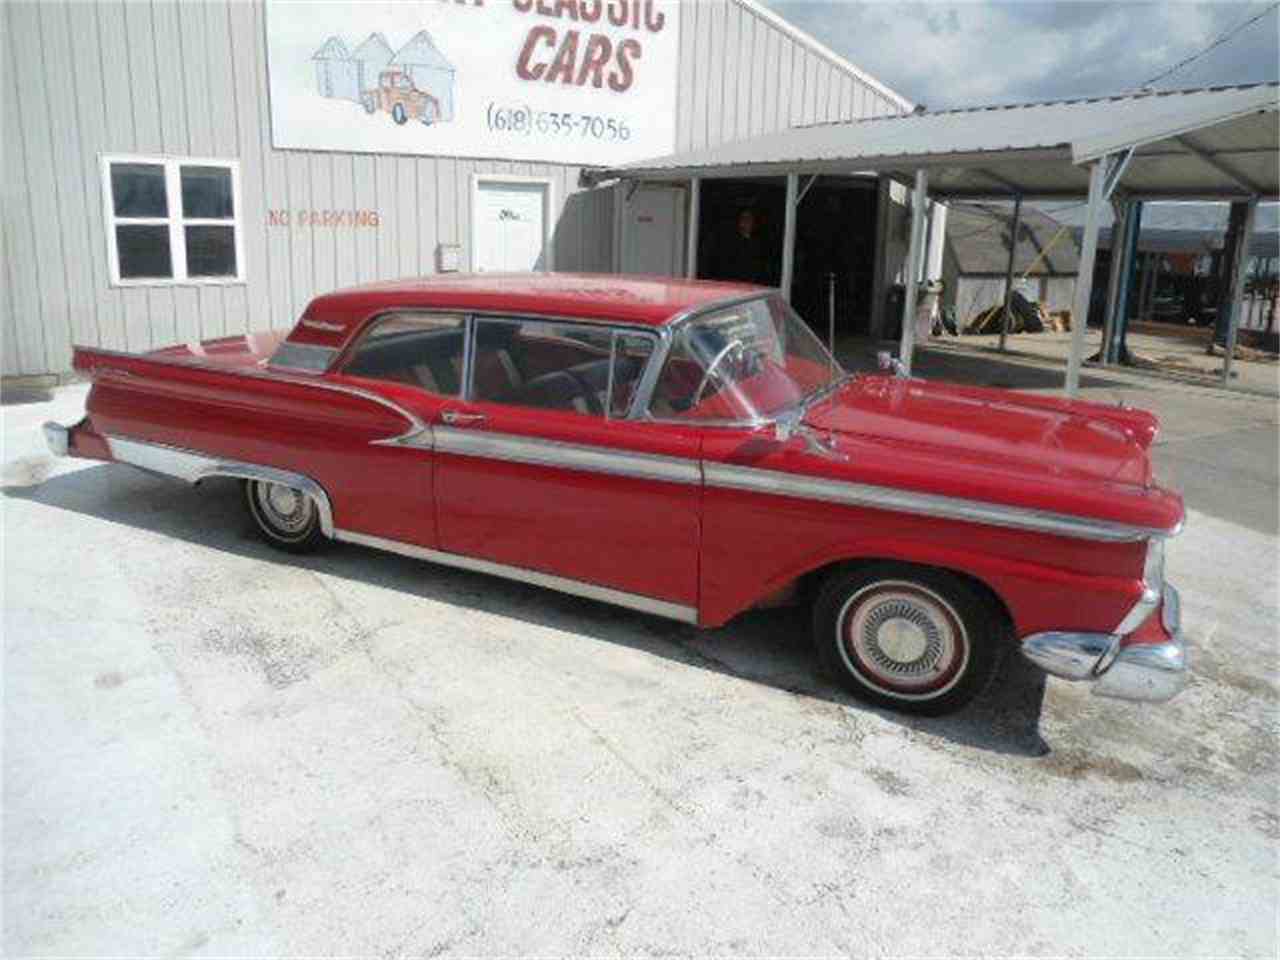 1959 Ford Galaxie For Sale Classiccars Cc 969754 for Classic Cars Richmond Il